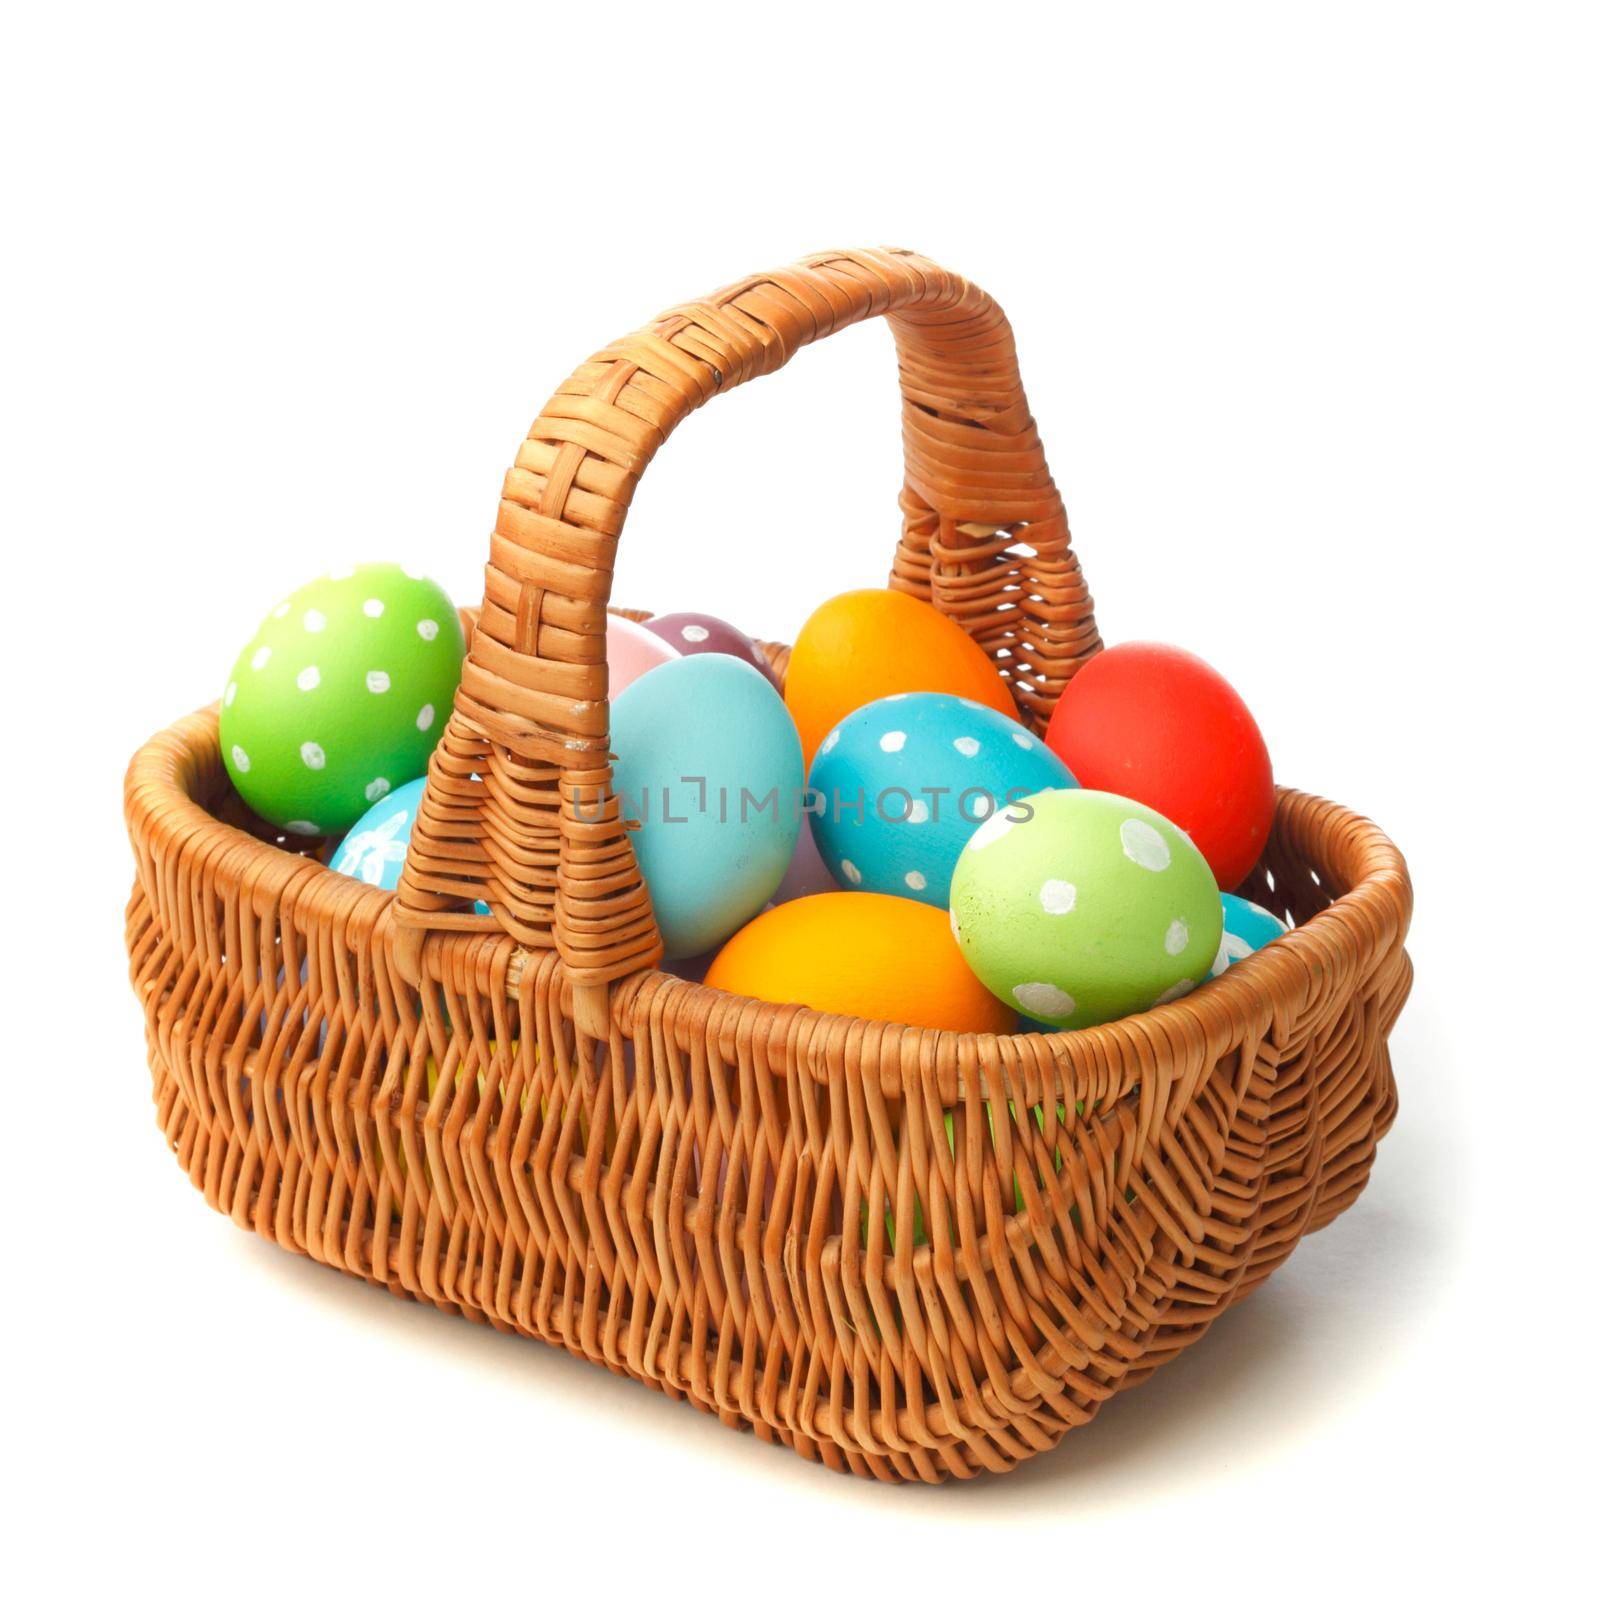 Basket with Easter eggs by Yellowj